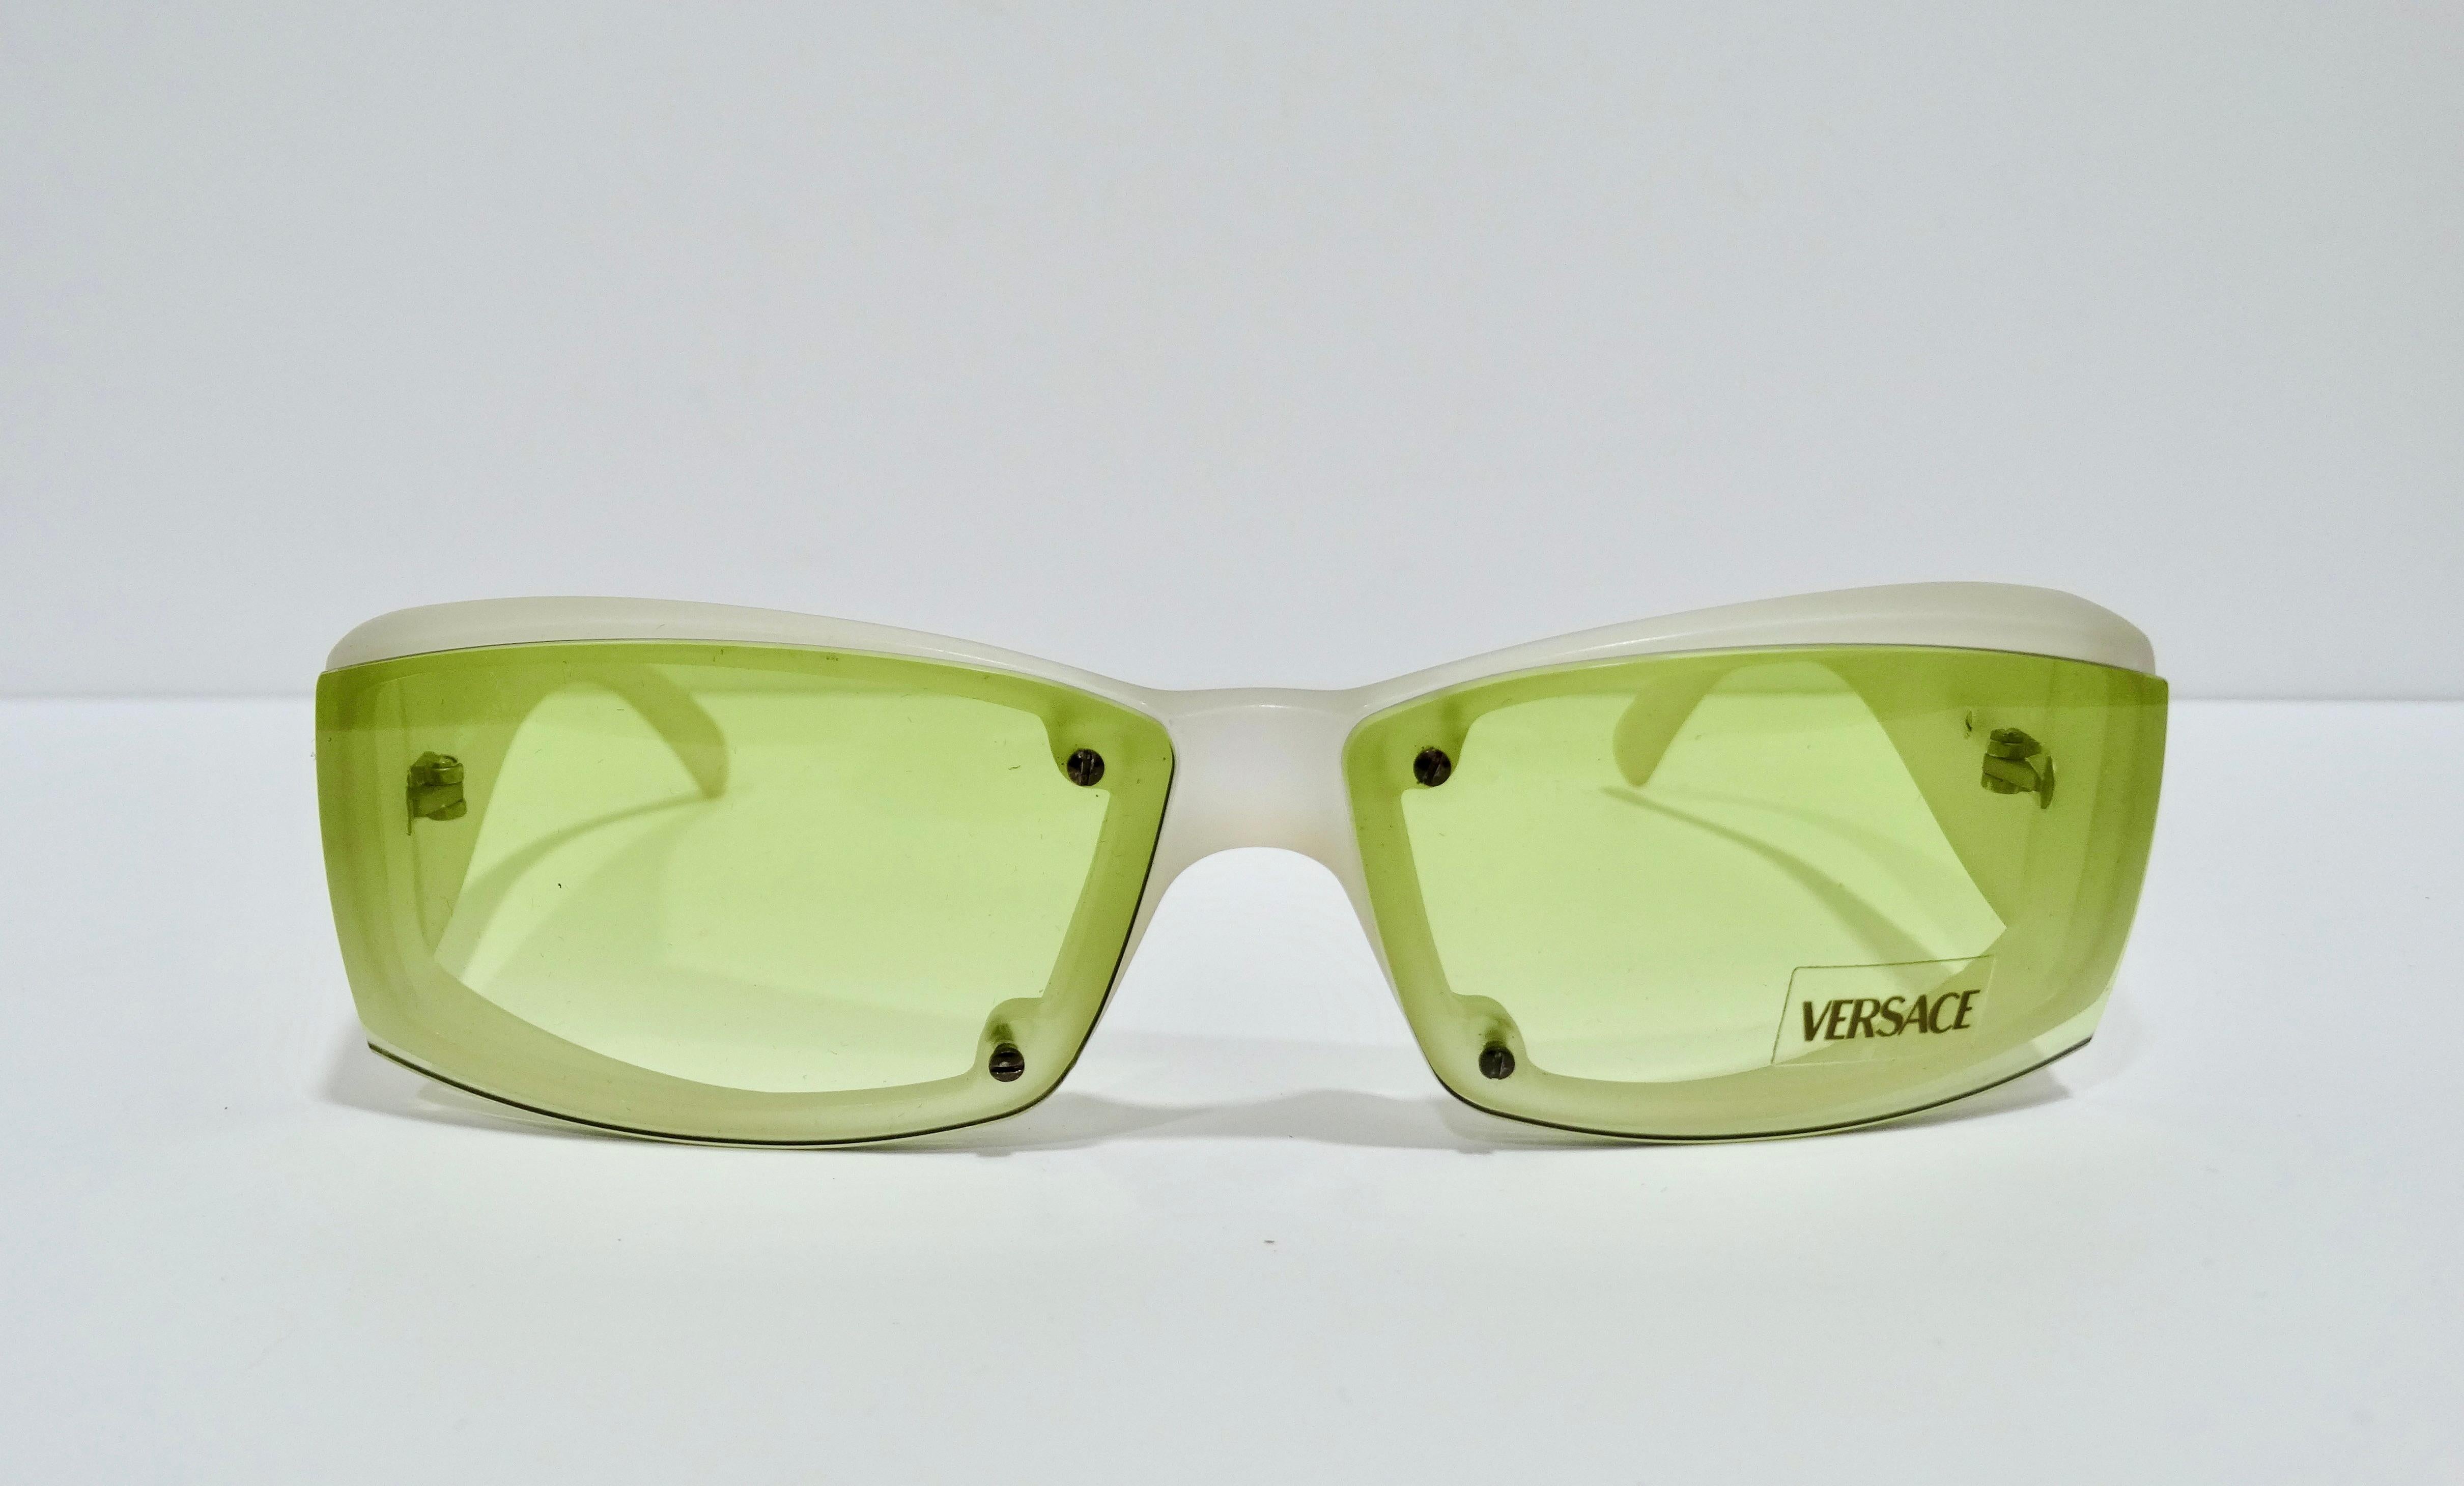 Everyone needs a pair of edgy sunglasses in their collection. This can take any outfit up 10 notches. This lime green is perfect to add a pop of color to any outfit and the modern touches will keep you reaching for them. Features include green